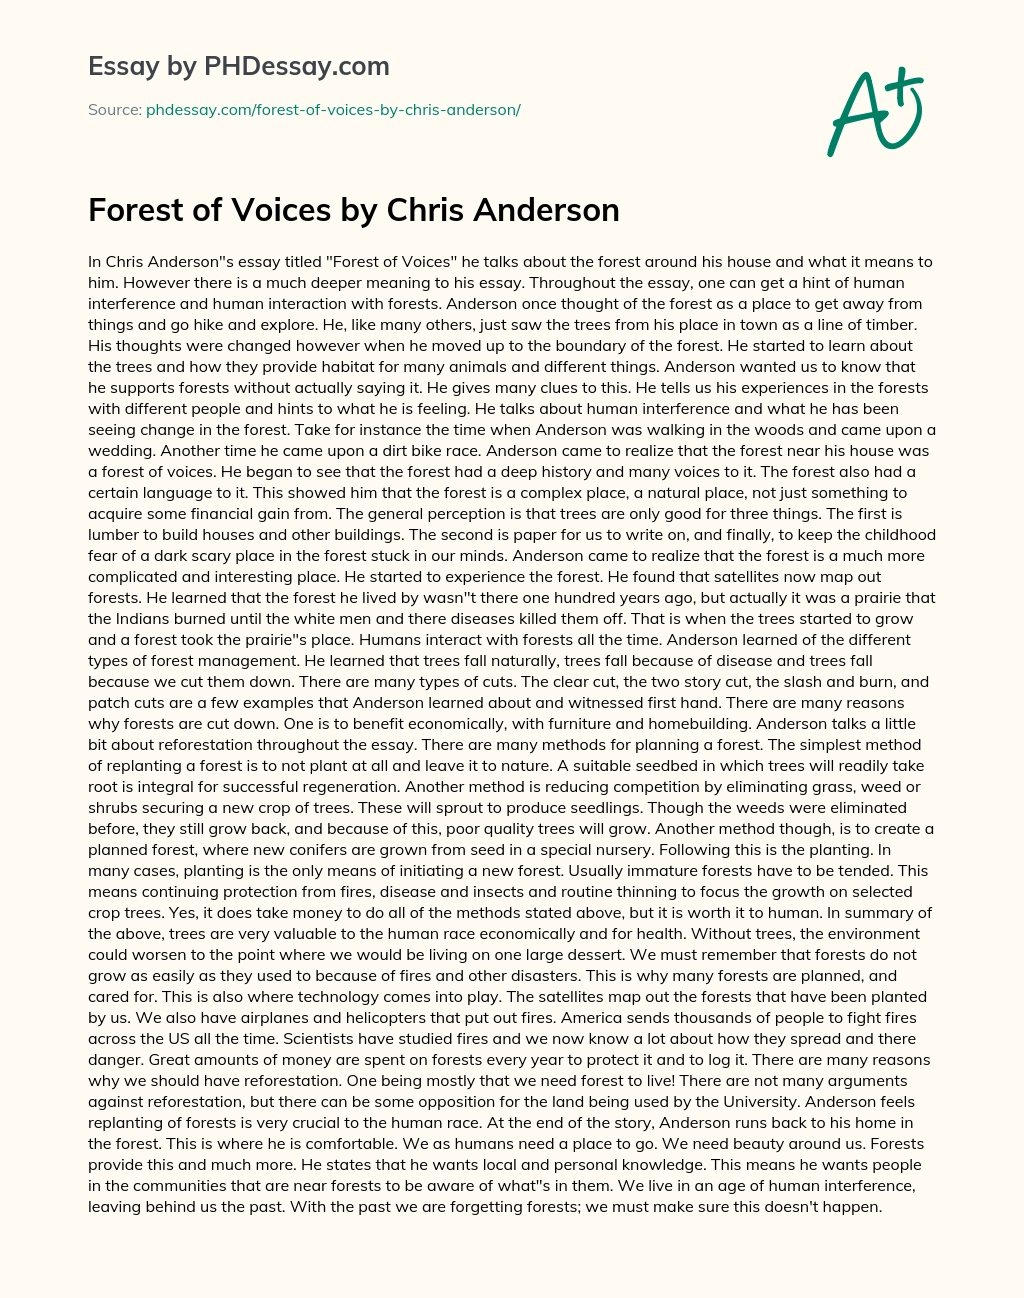 Forest of Voices by Chris Anderson essay